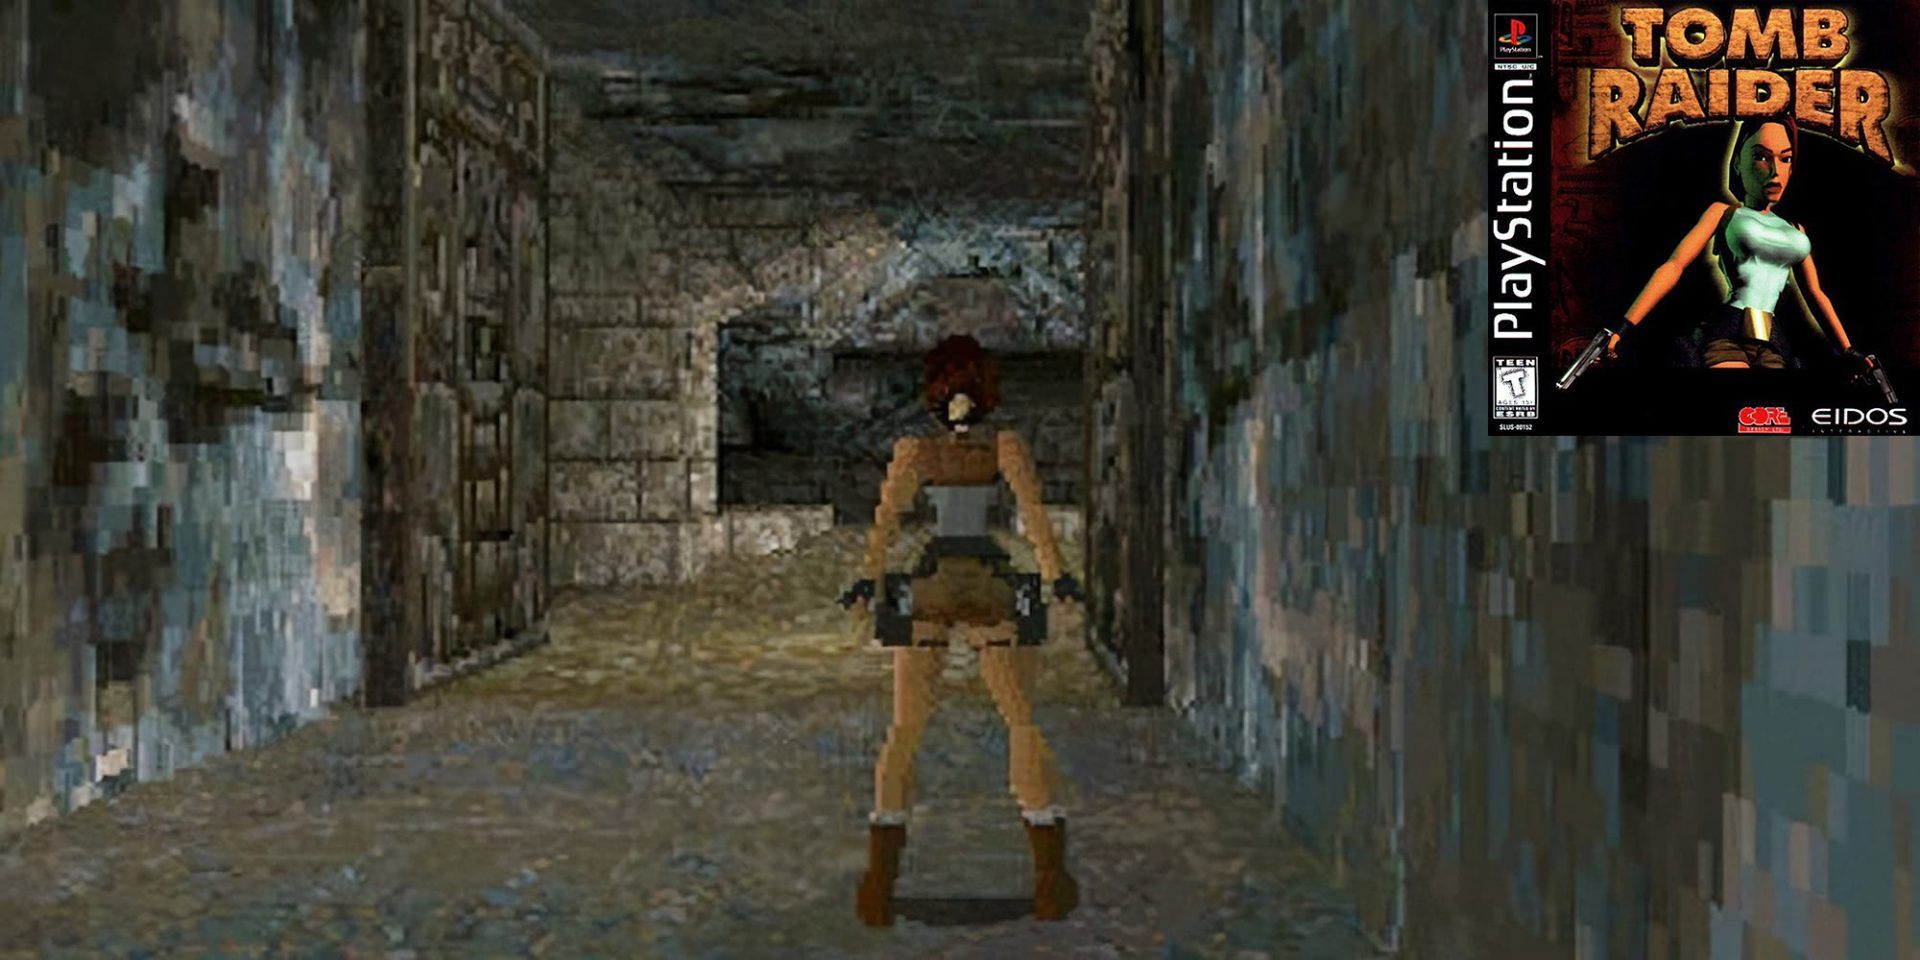 Screenshot from Tomb Raider PS1, with the game's cover in the top right corner.